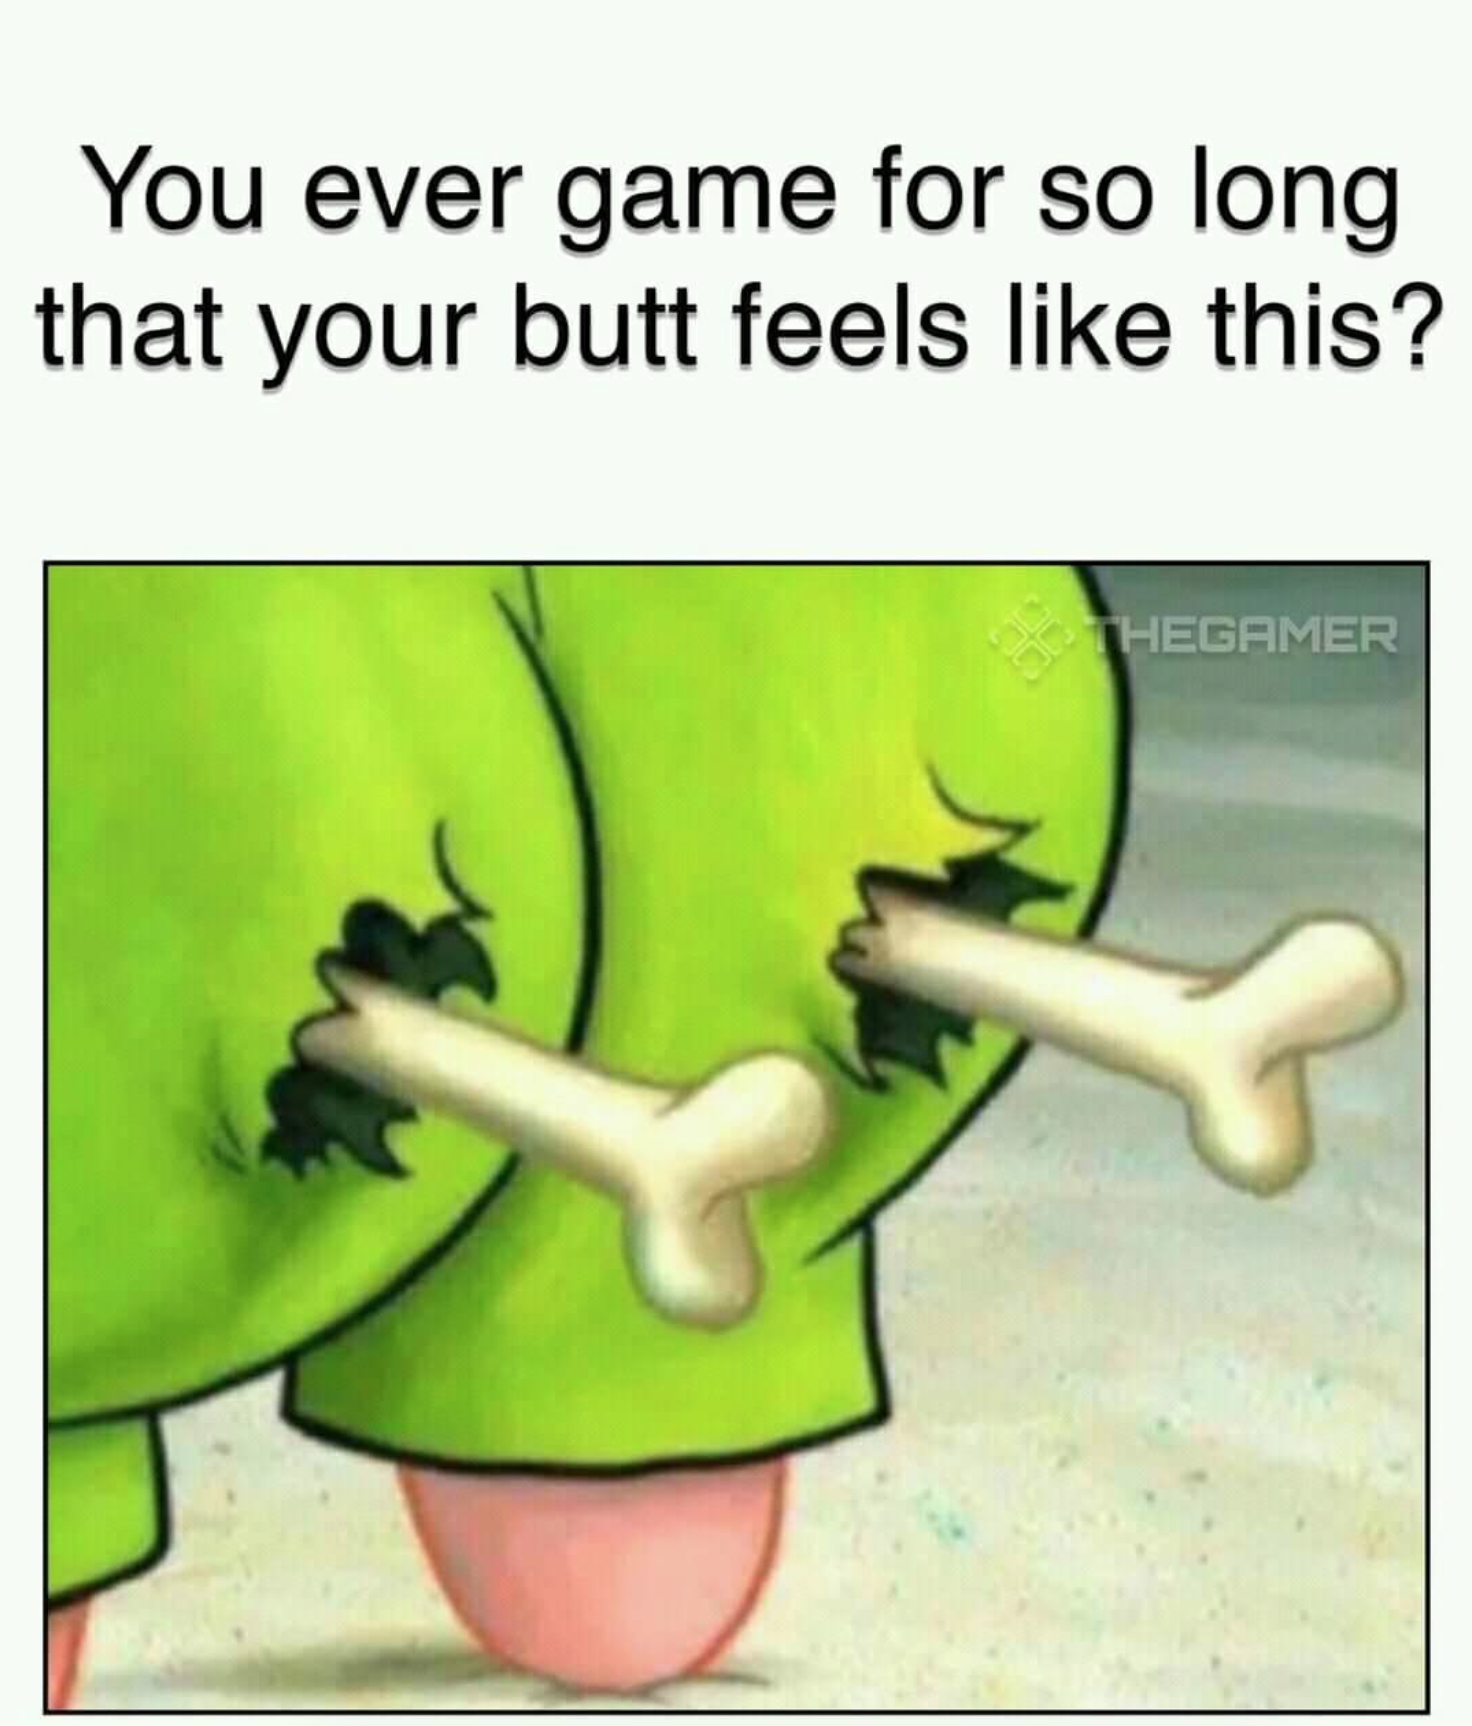 patrick star but - You ever game for so long that your butt feels this? Hegamer